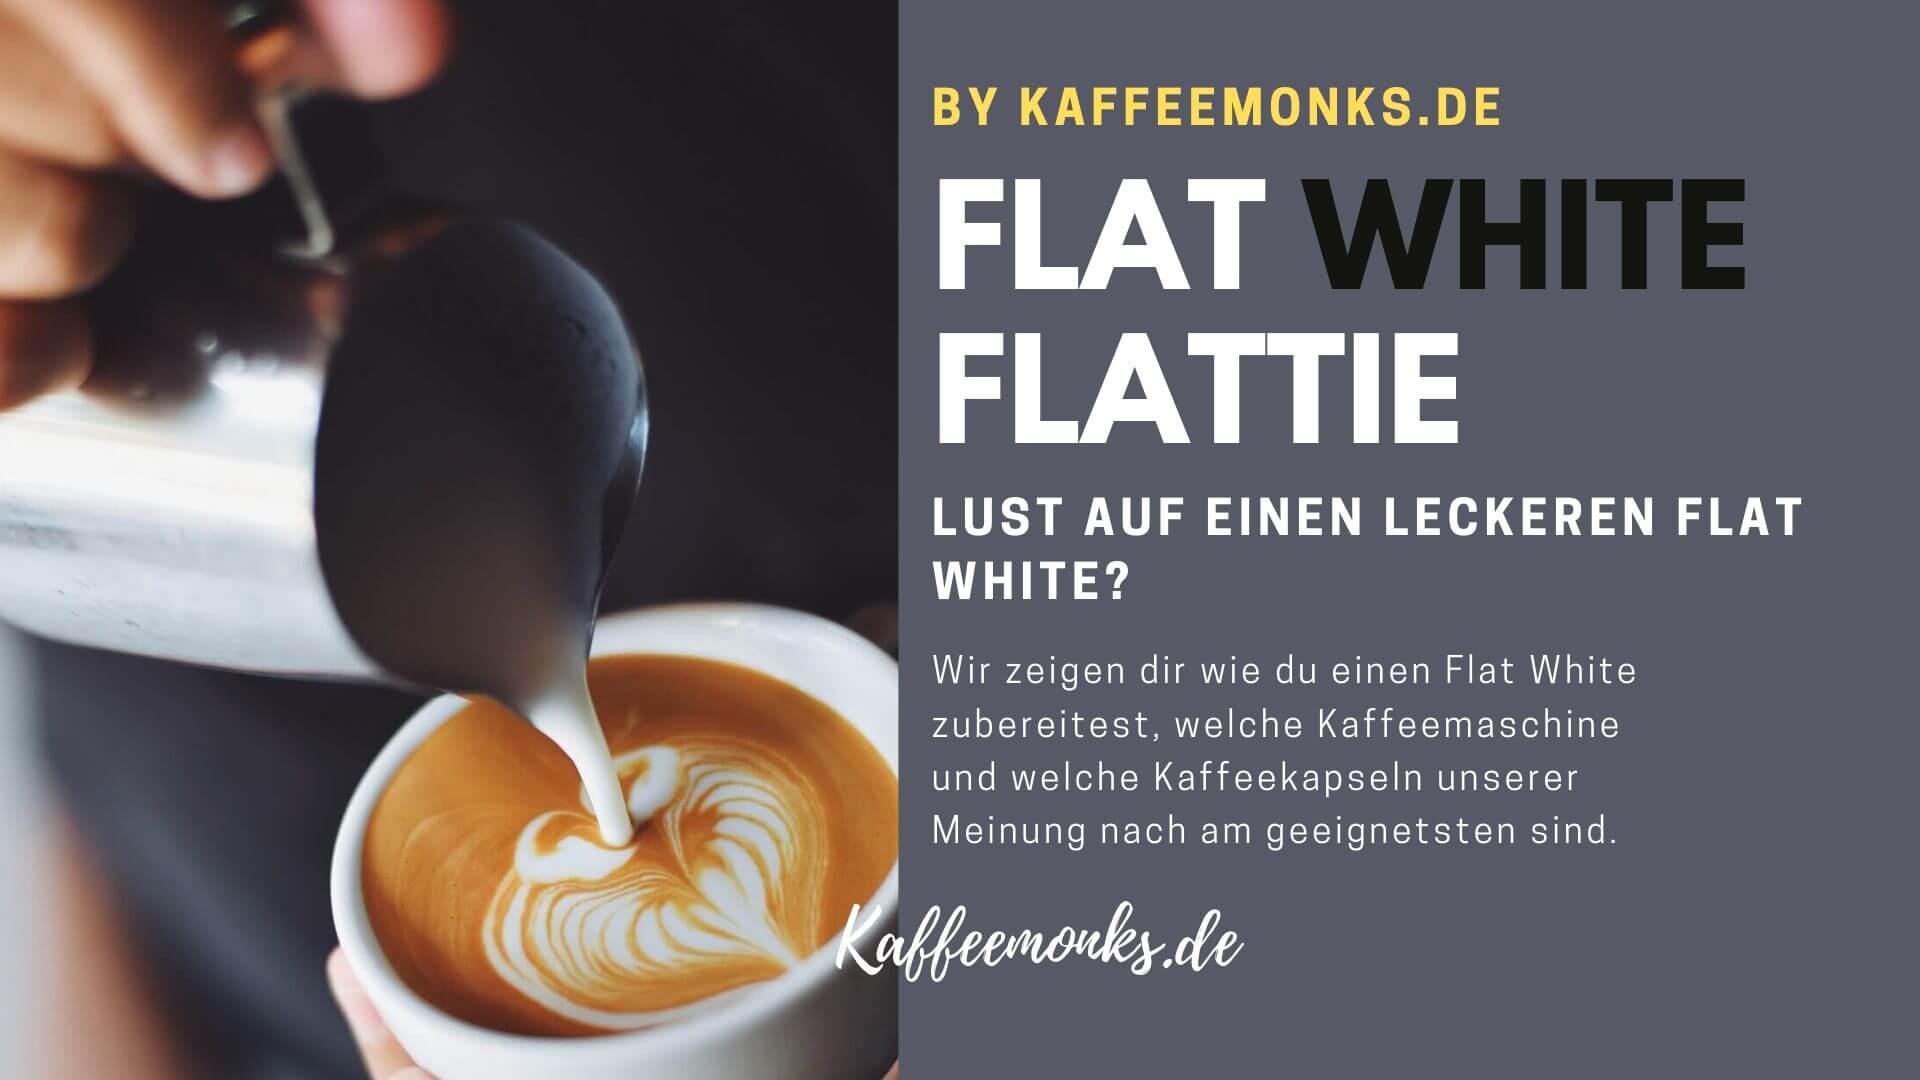 You are currently viewing FLAT WHITE